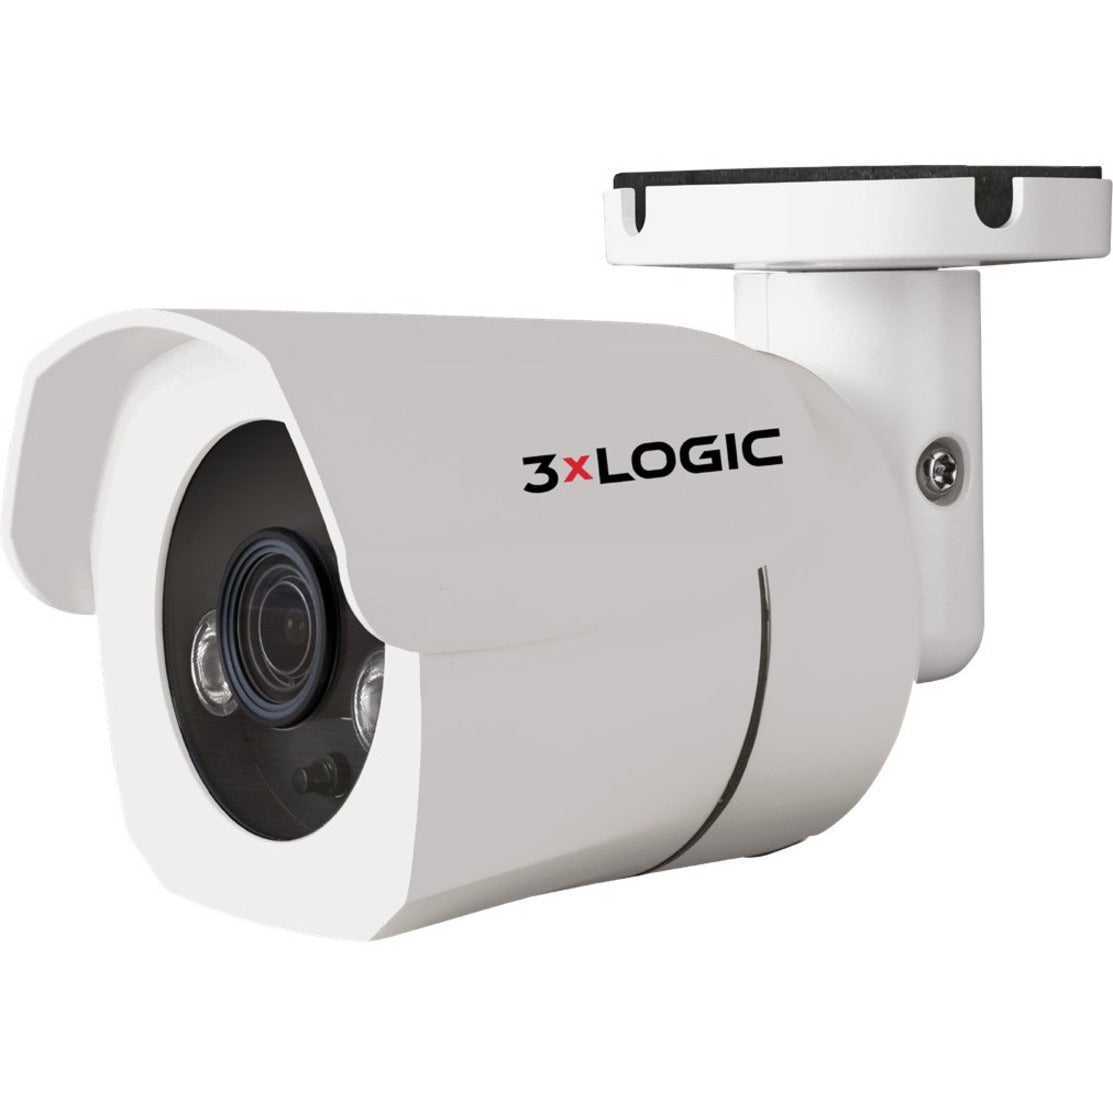 3xLOGIC VX-5M4-MB-IW-C128 Visix Network Camera, 5MP, 4mm Lens, SD Card Local Storage, Motion Detection, Indoor/Outdoor